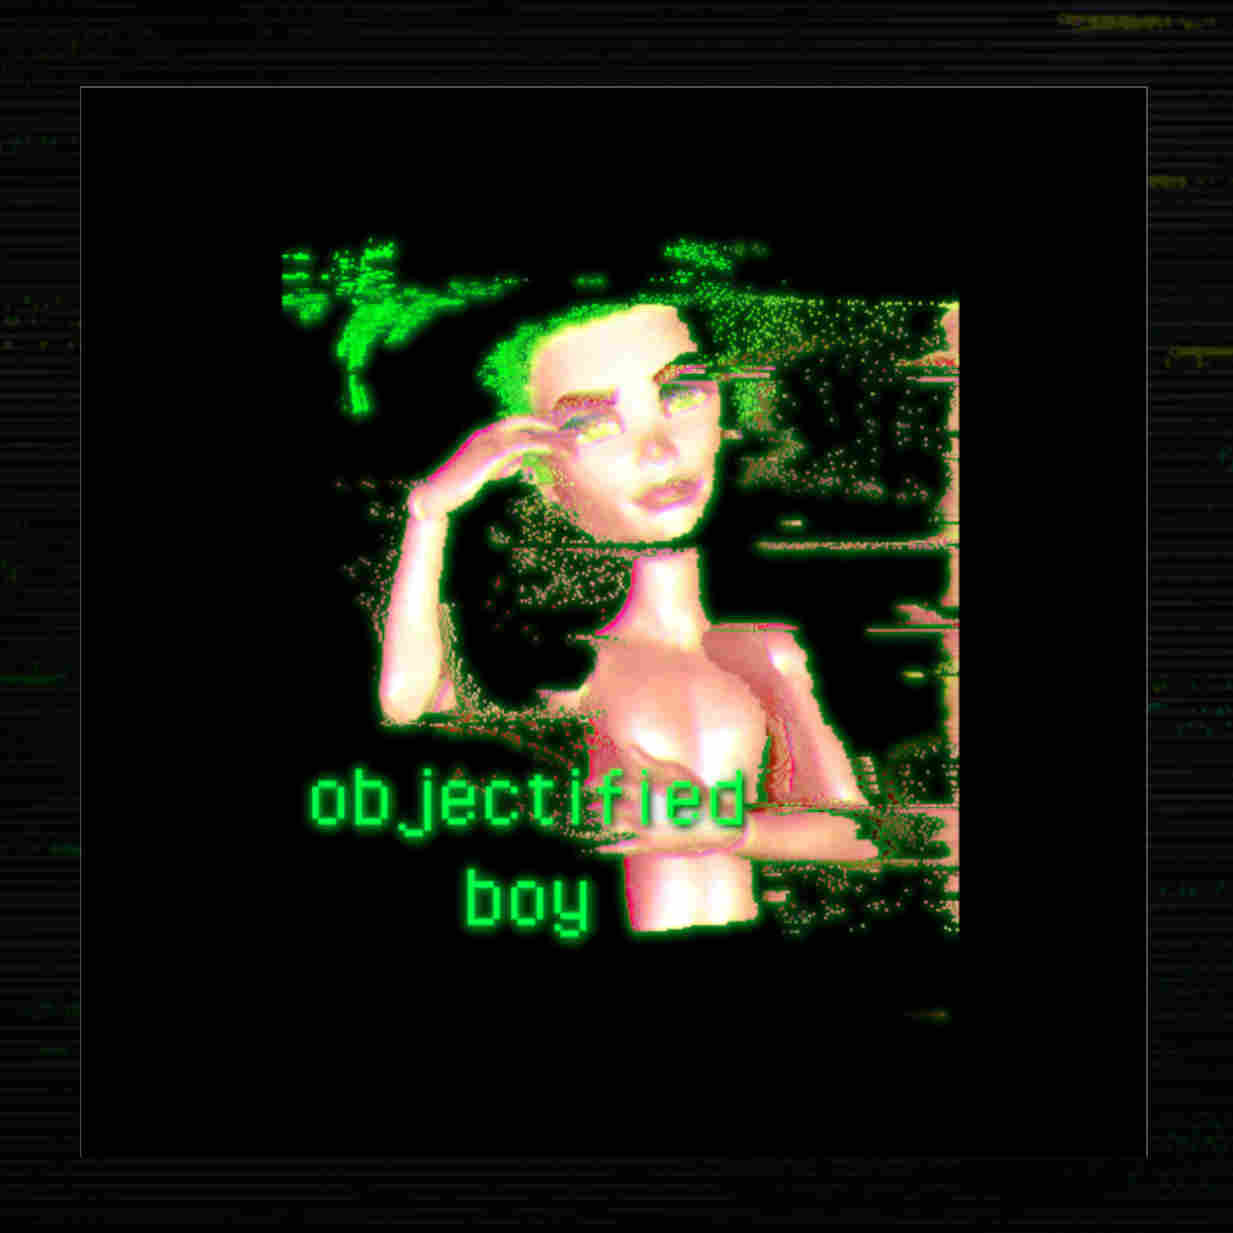 sticker with a glitched image of a boy doll that says : Objectified Boy